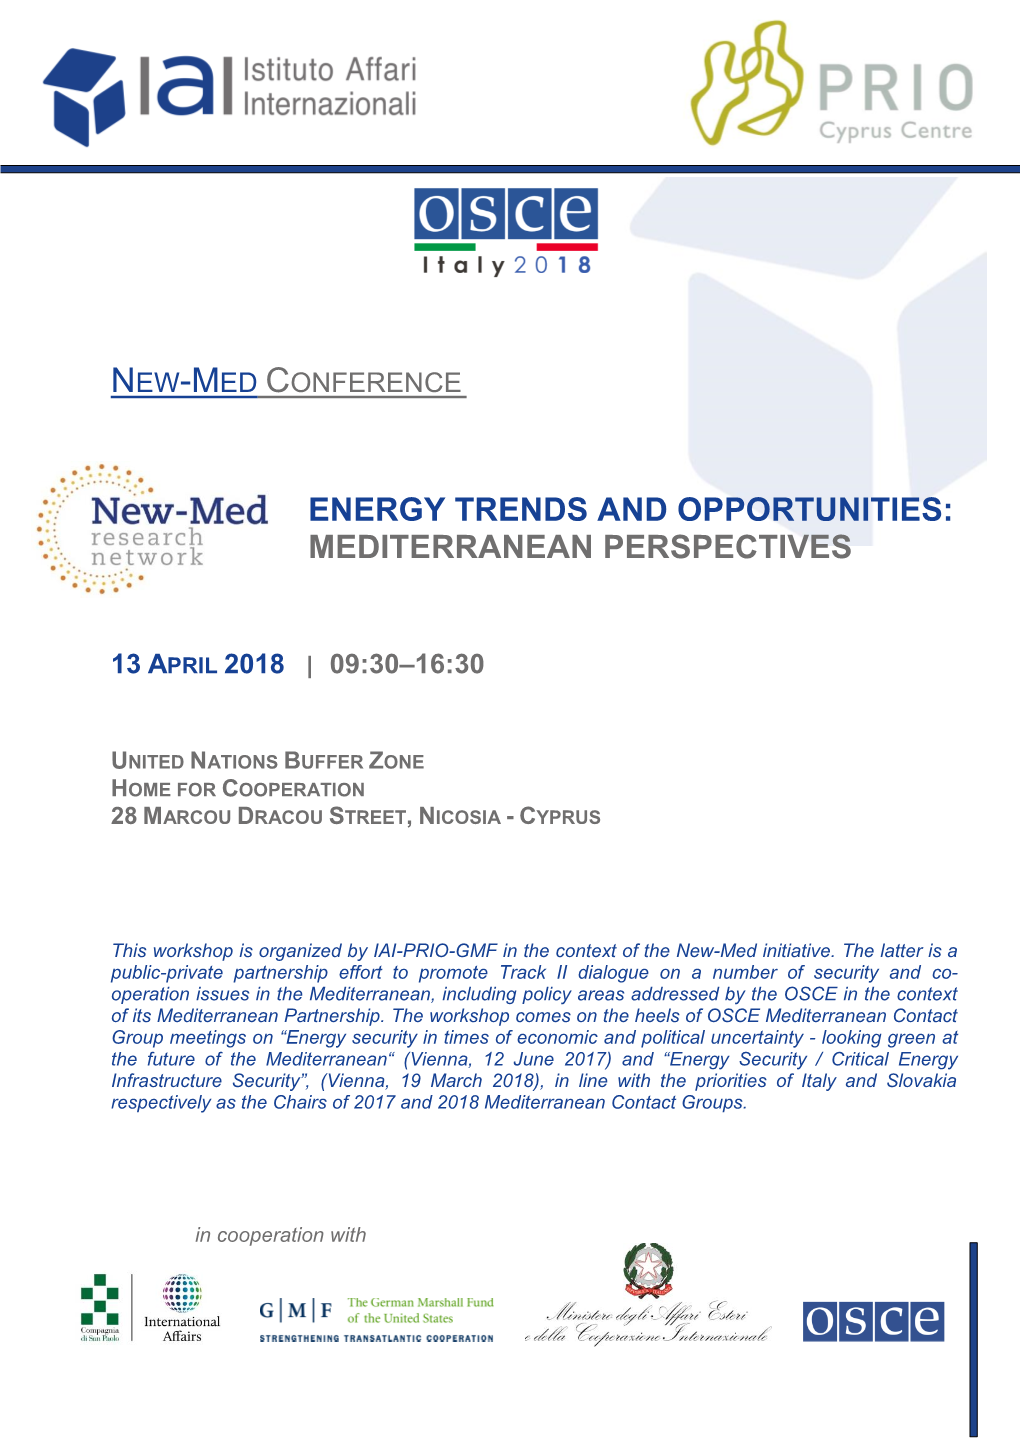 Energy Trends and Opportunities: Mediterranean Perspectives